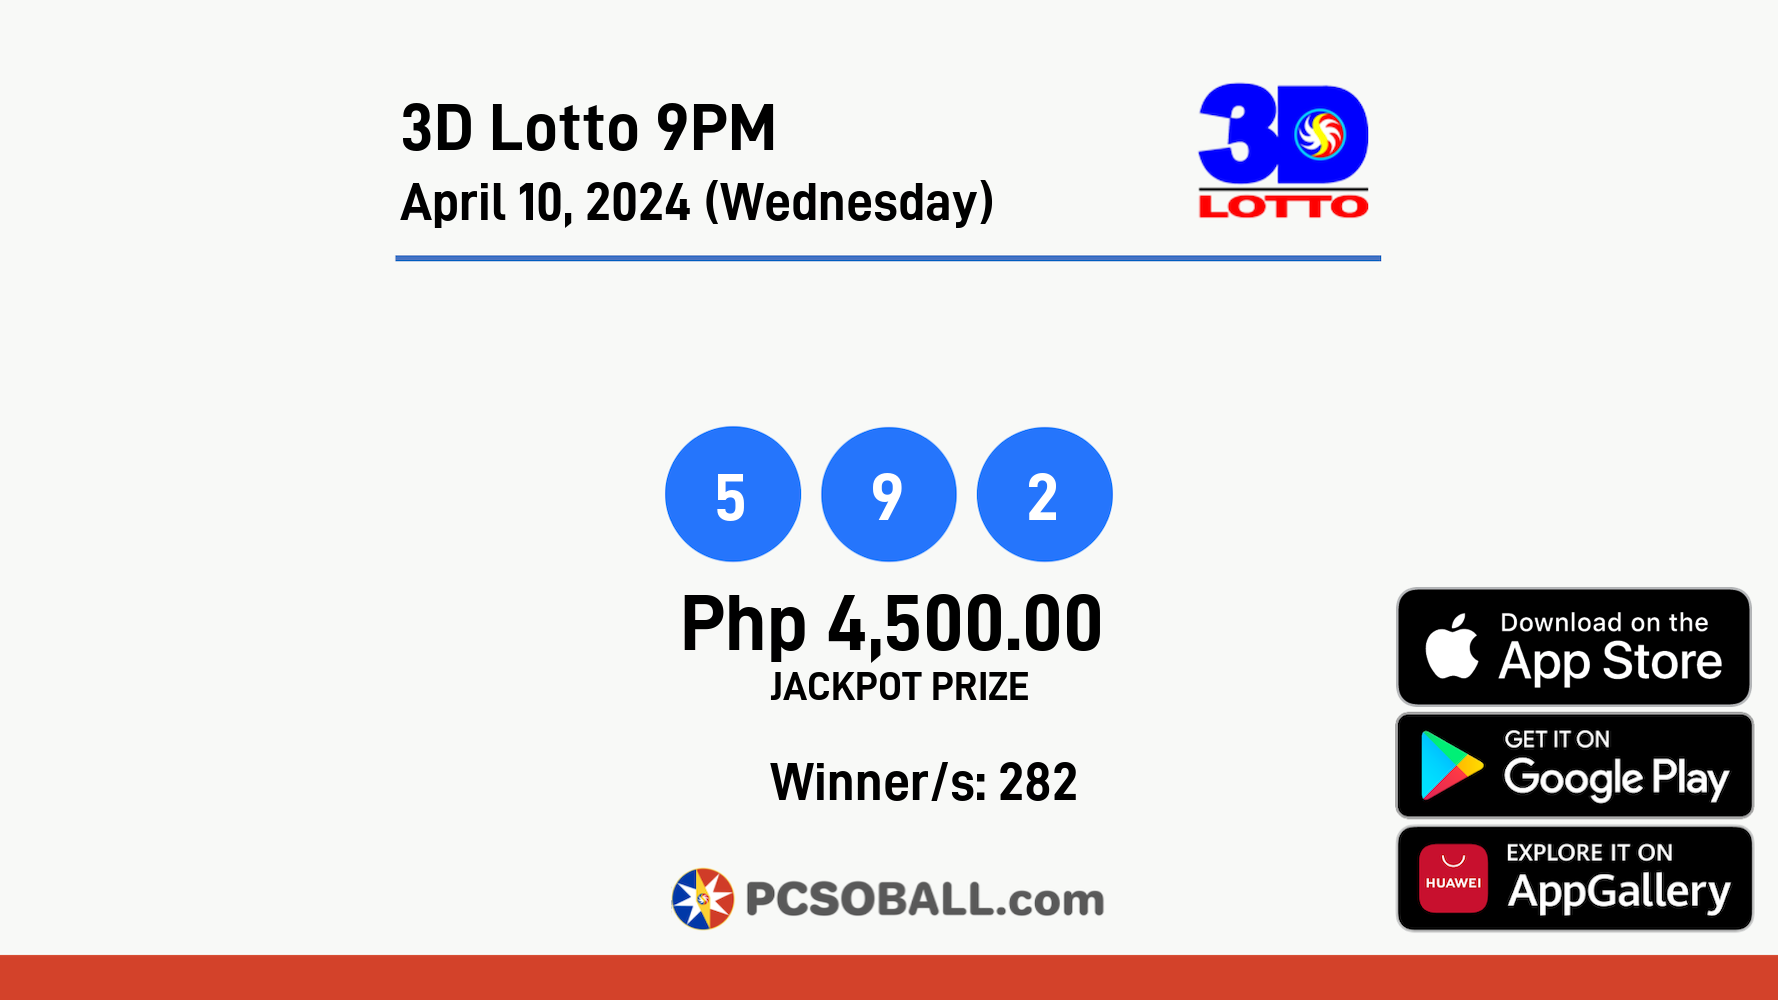 3D Lotto 9PM April 10, 2024 (Wednesday) Result